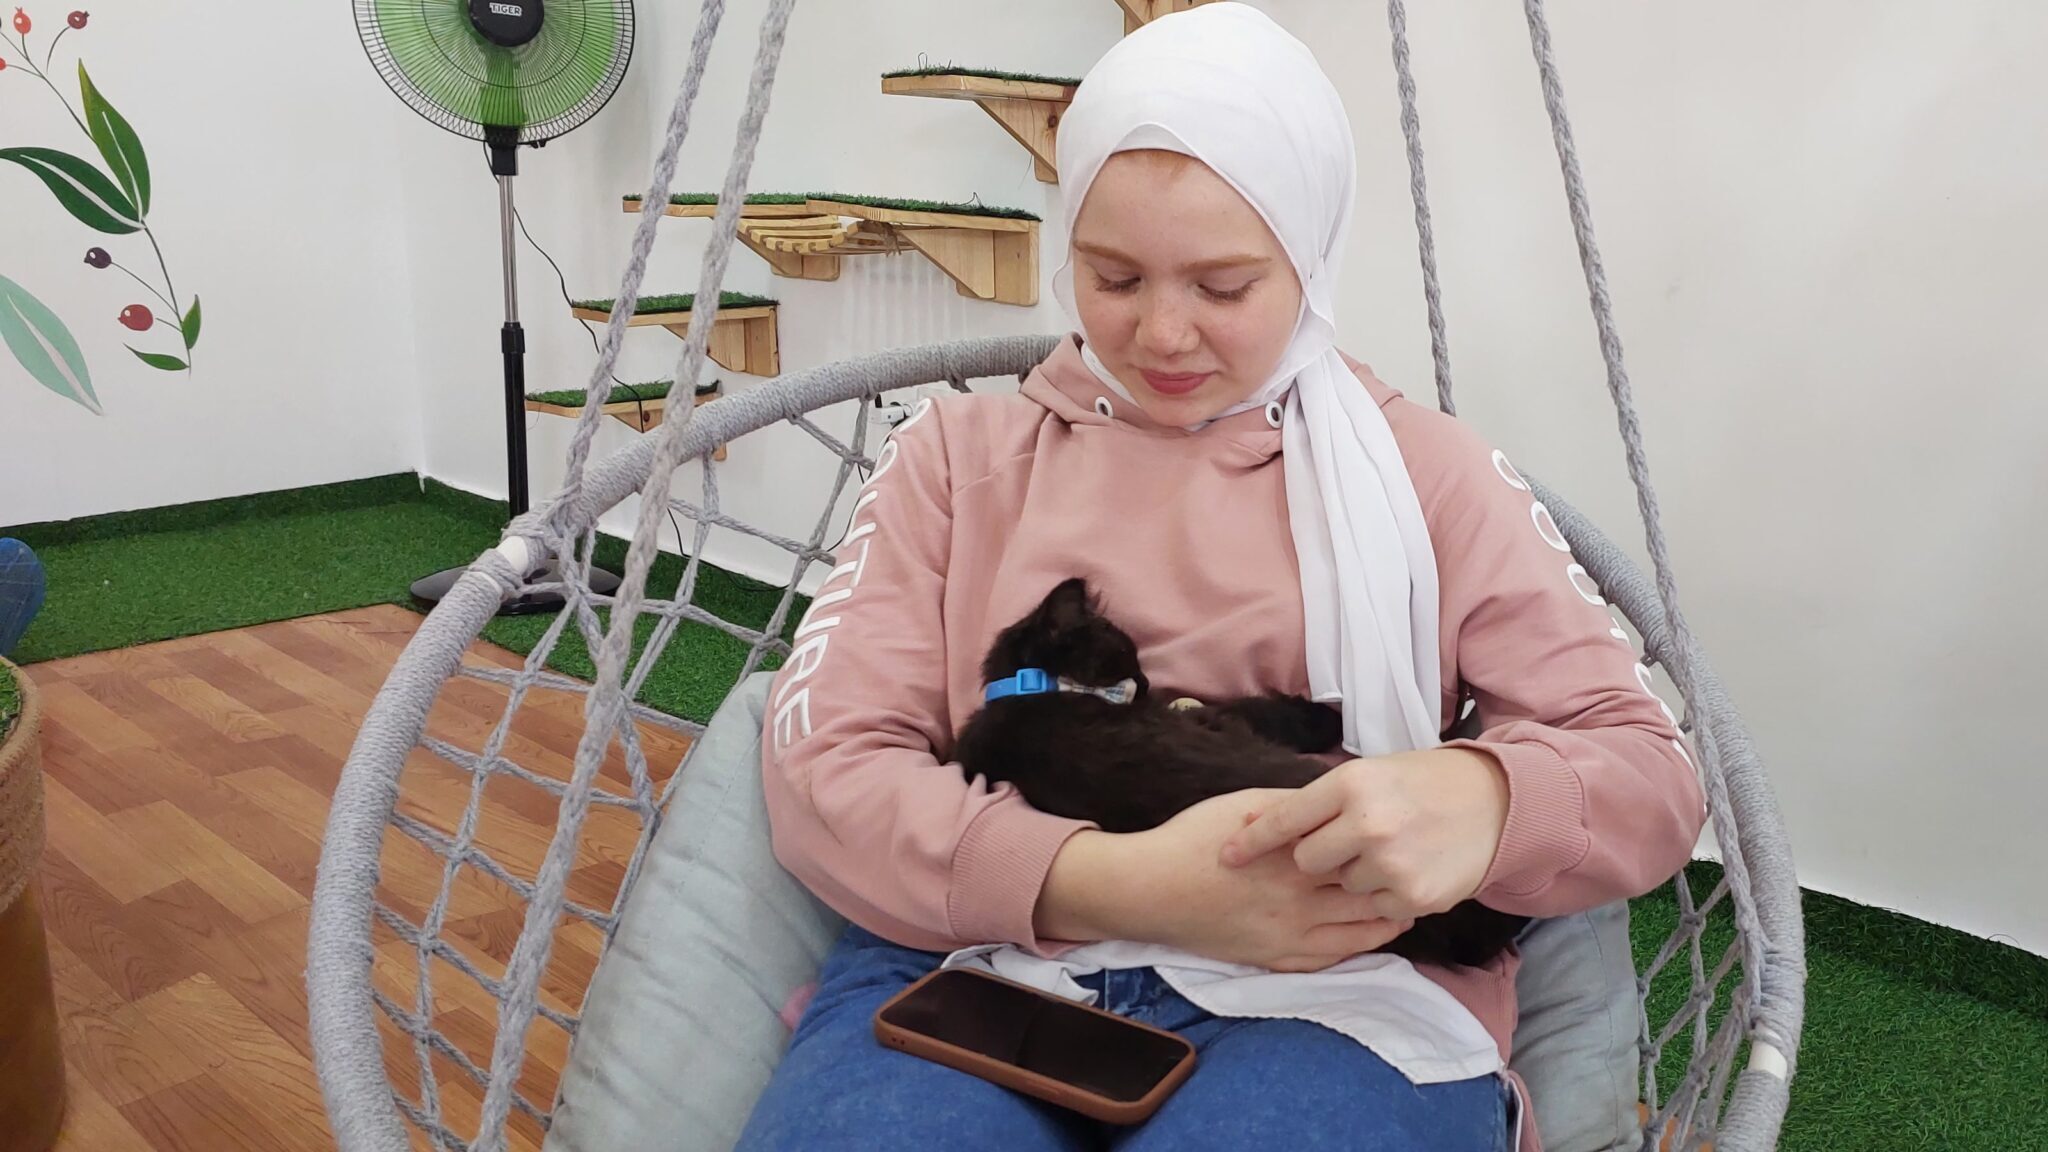 The Power of Pawsitivity: Gaza’s Meow Cat Café Offers a Refuge for War-Weary Residents